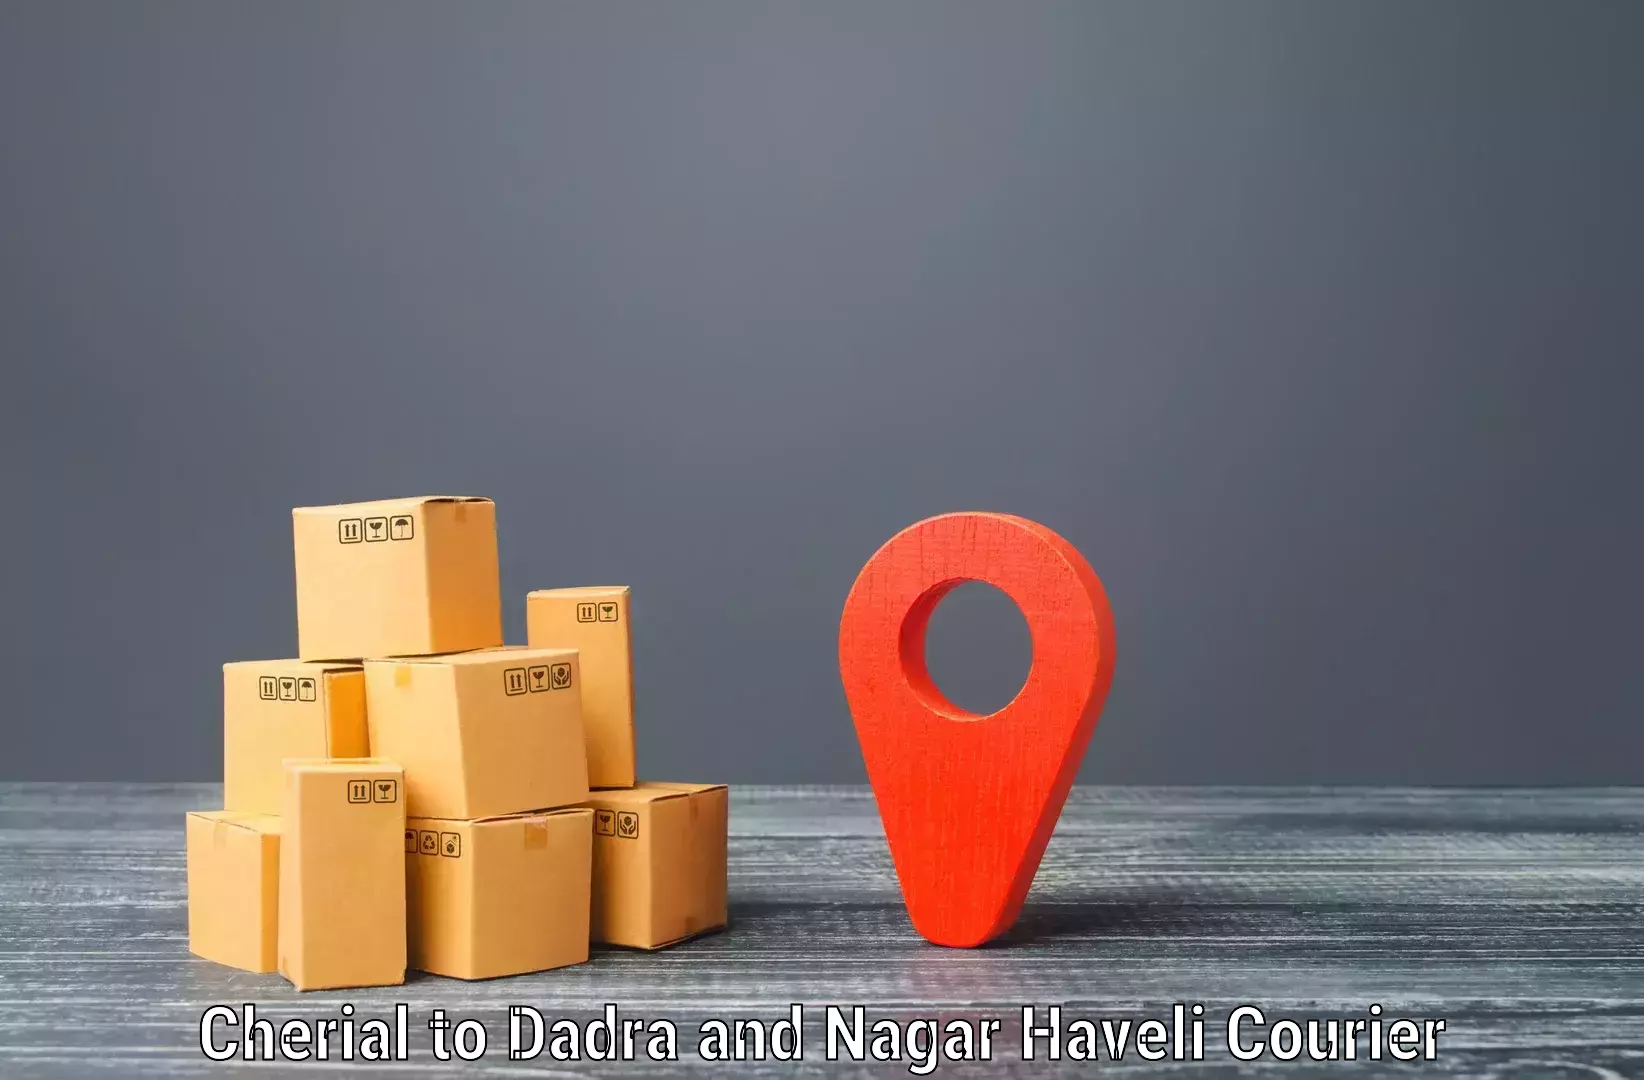 Round-the-clock parcel delivery Cherial to Dadra and Nagar Haveli